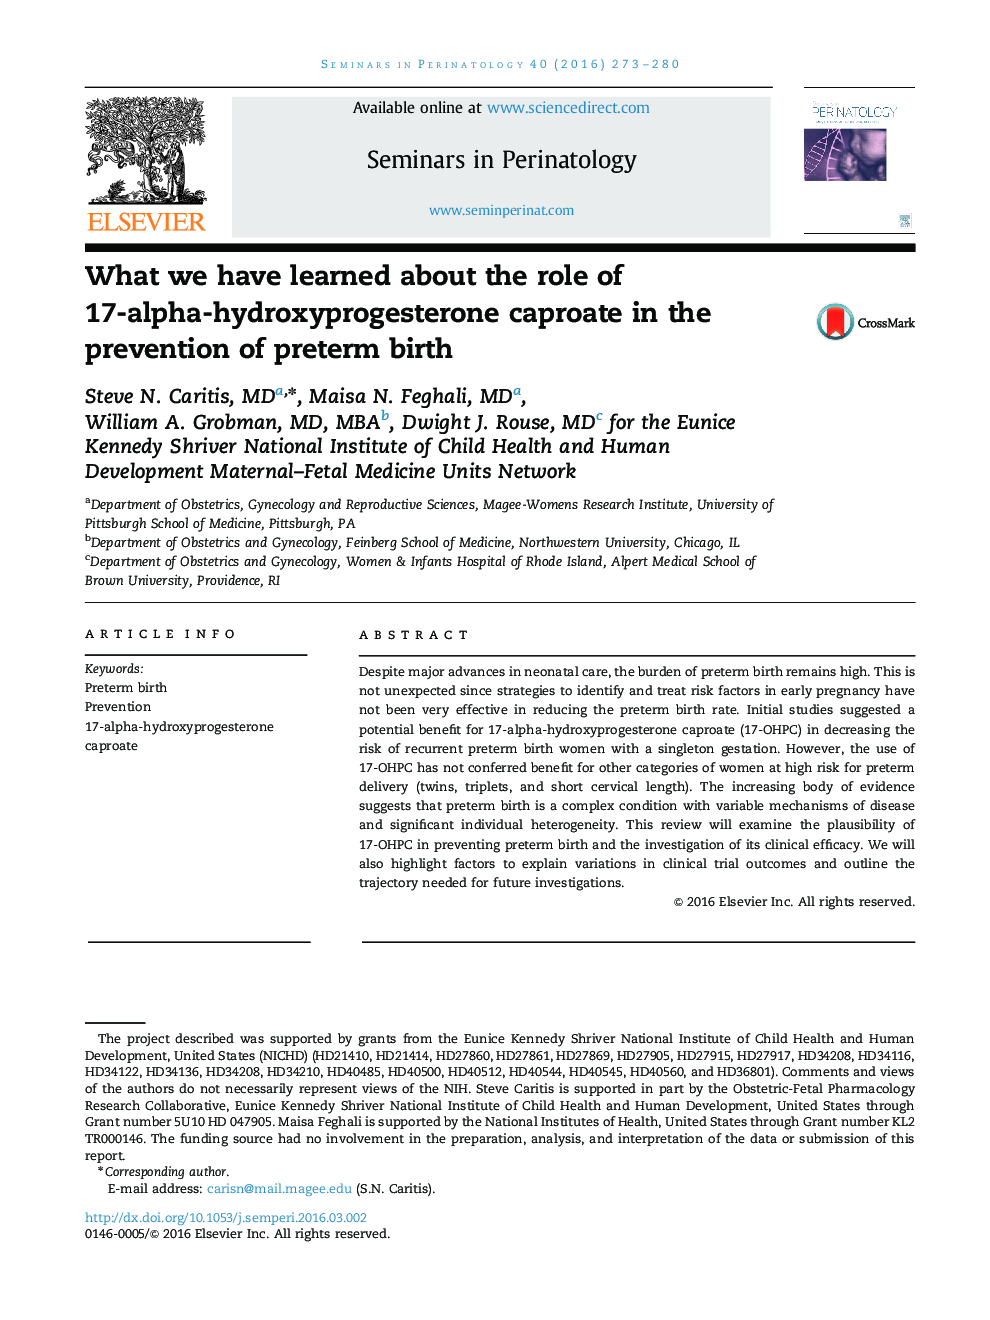 What we have learned about the role of 17-alpha-hydroxyprogesterone caproate in the prevention of preterm birth 